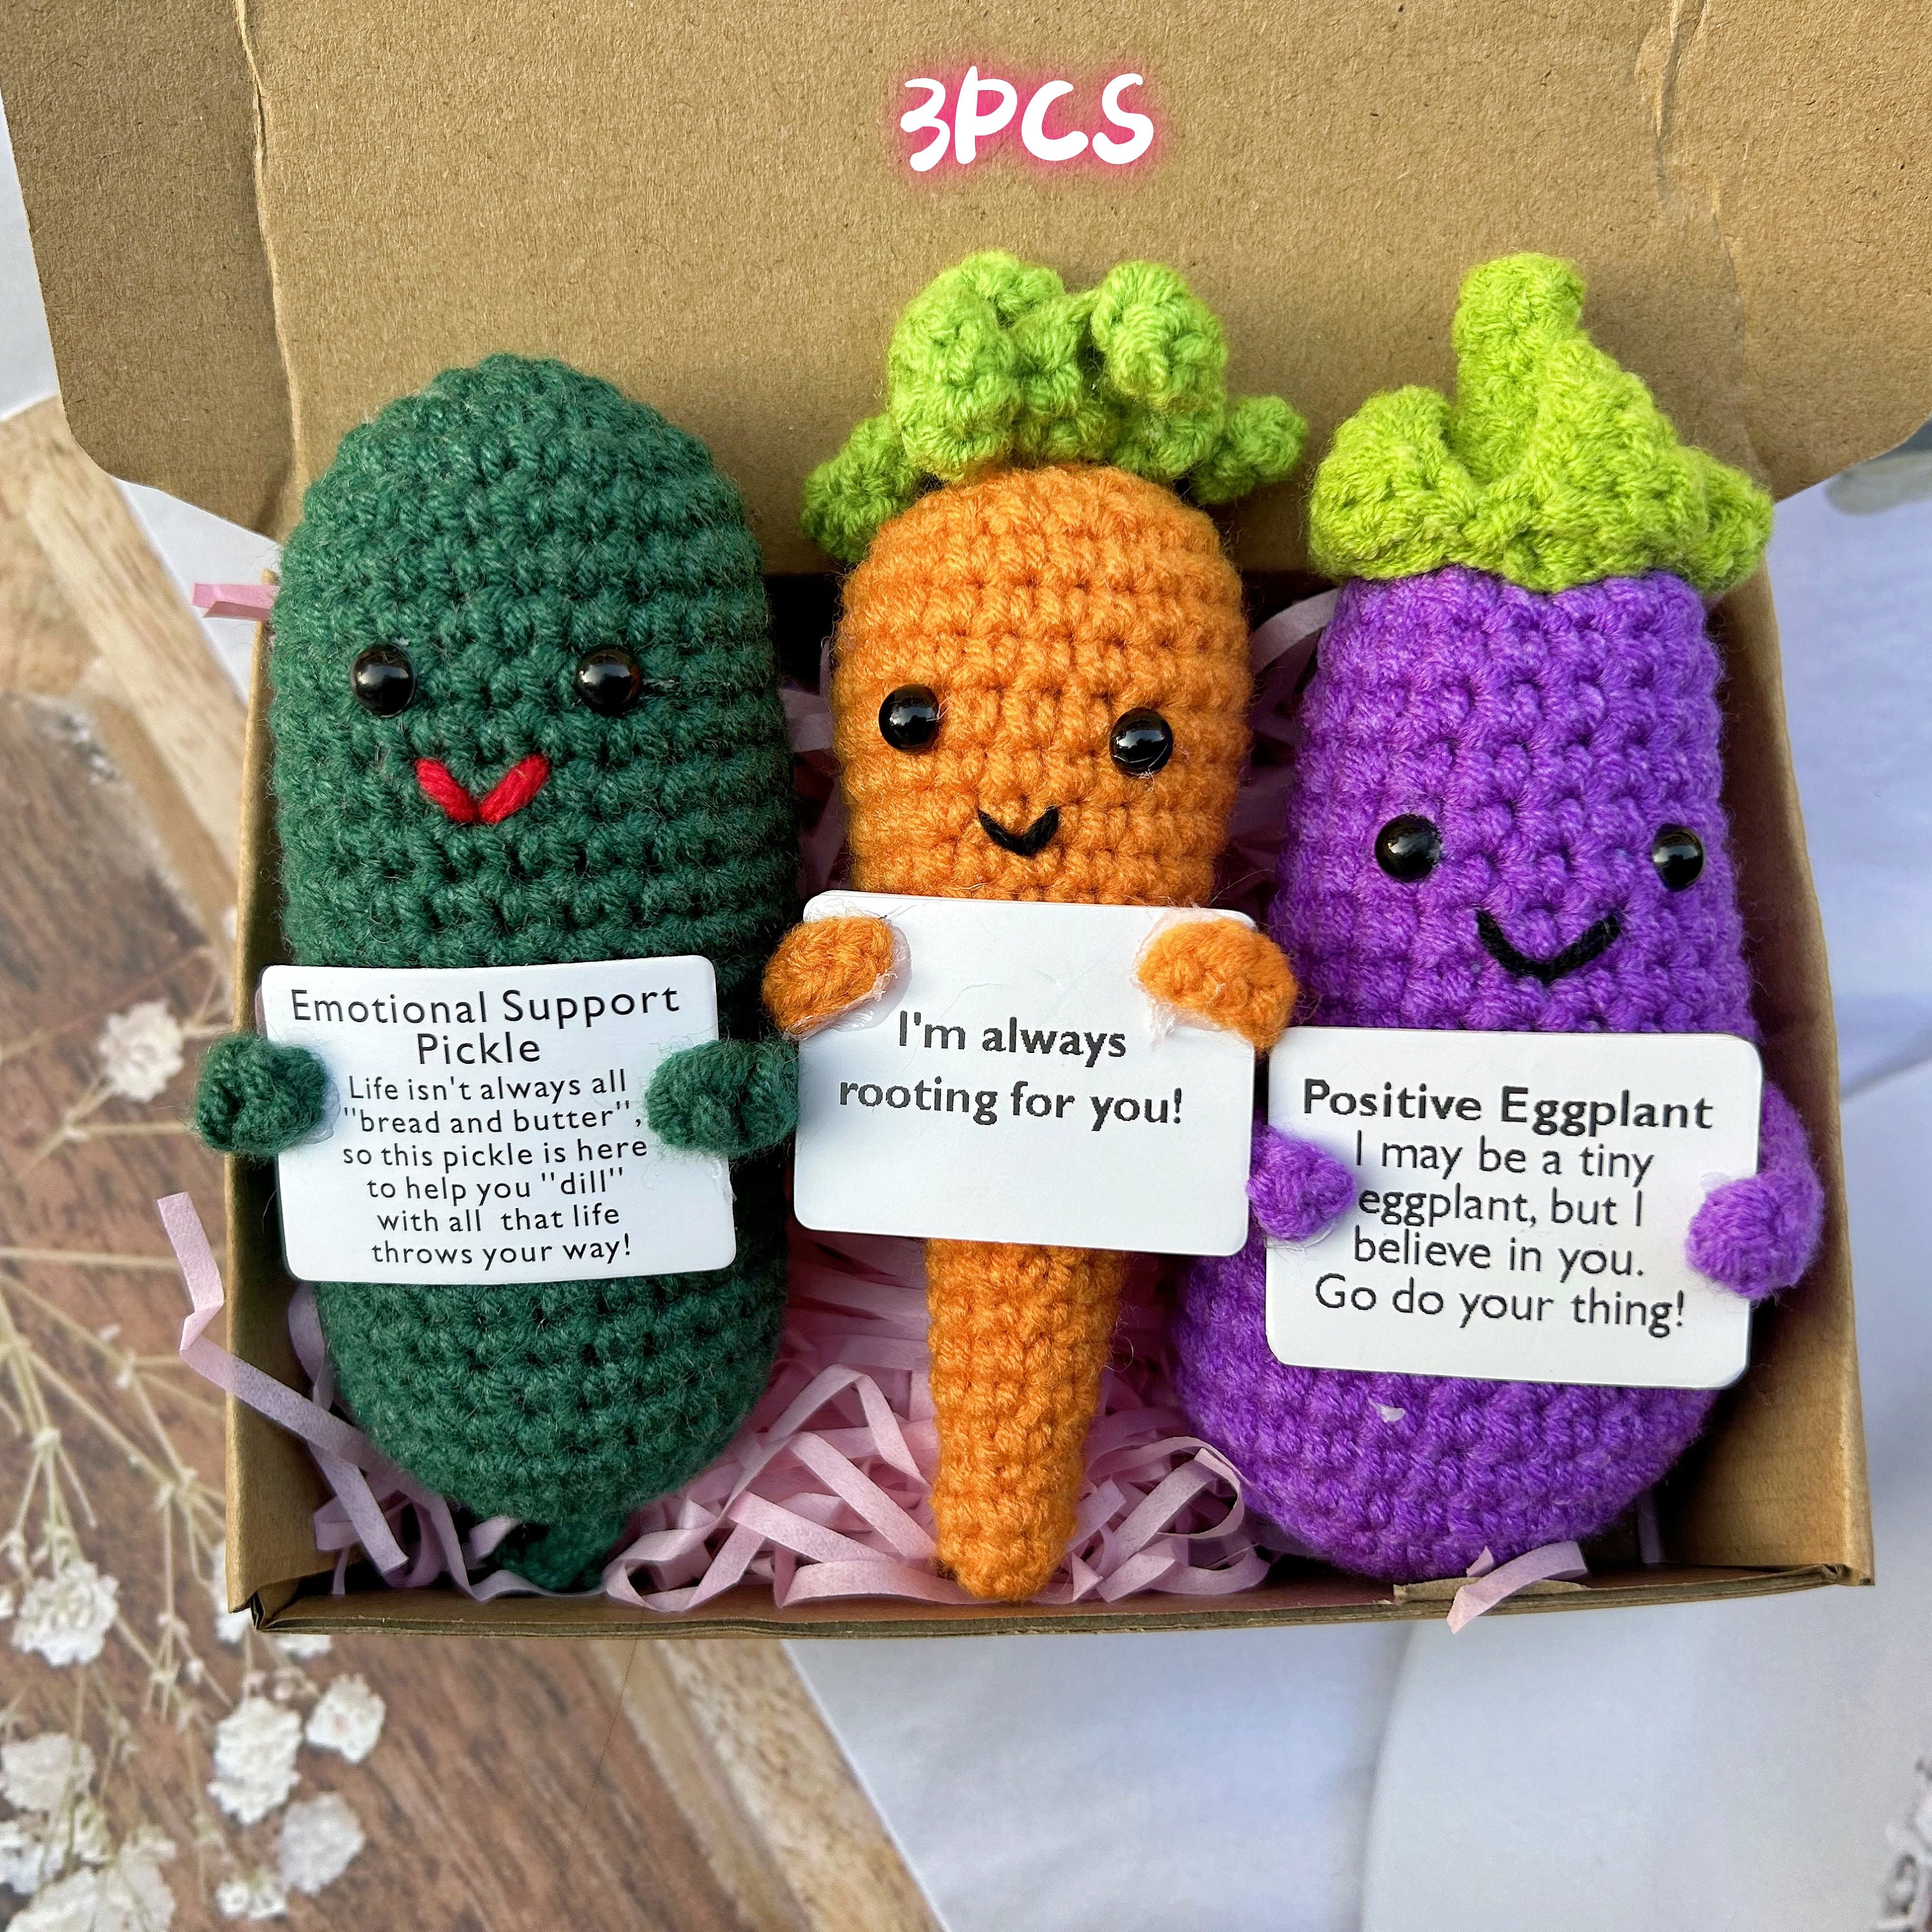 Duixinghas Emotional Support Potato Toy Crocheted Potted Sunflower Ornament Cartoon Potato Toy Set Positive Life Vegetable Dolls for Stress Relief